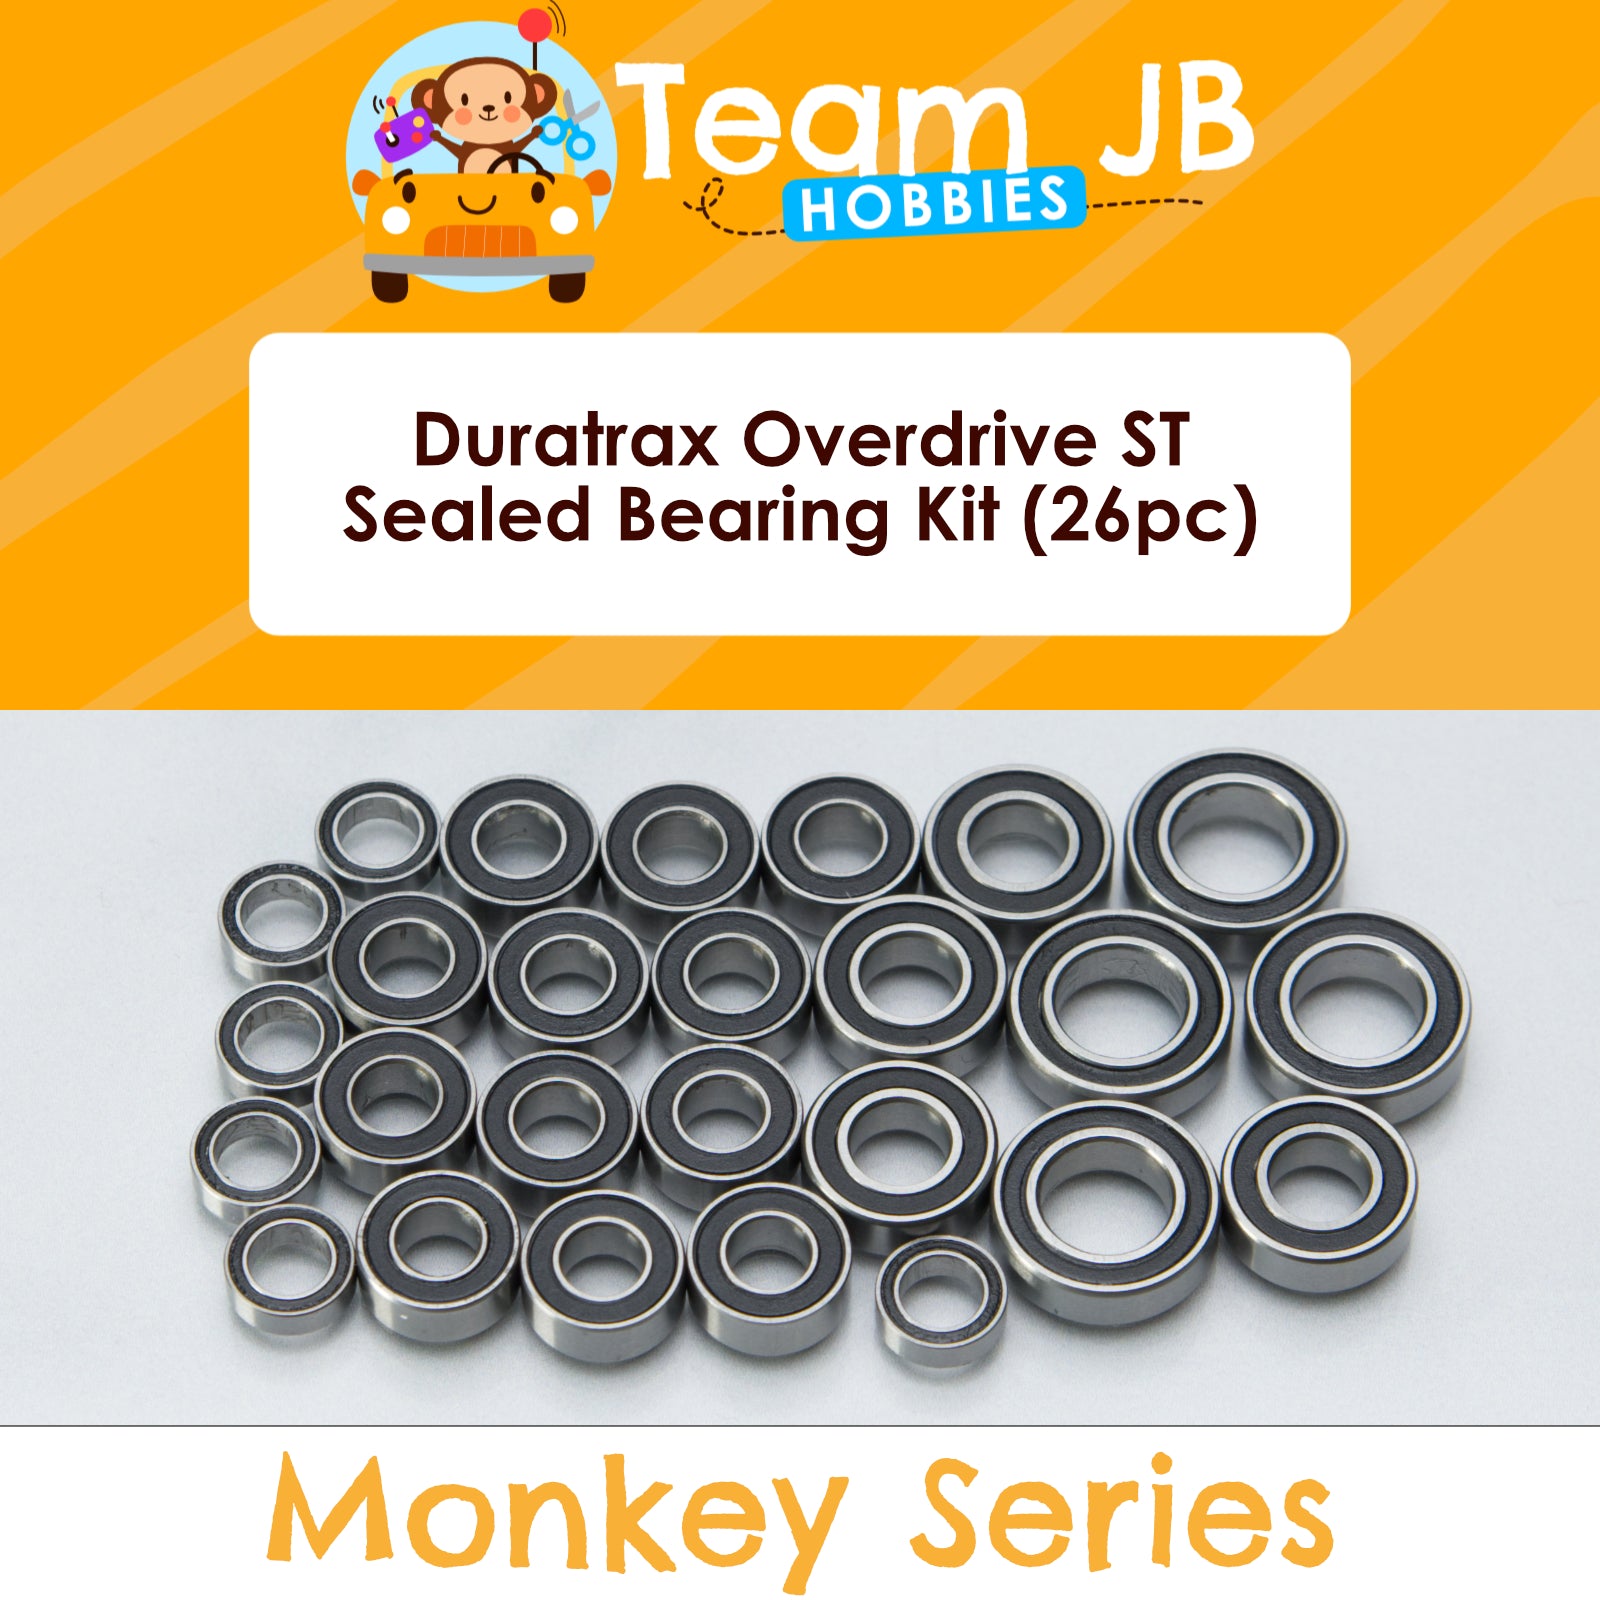 Duratrax Overdrive ST - Sealed Bearing Kit